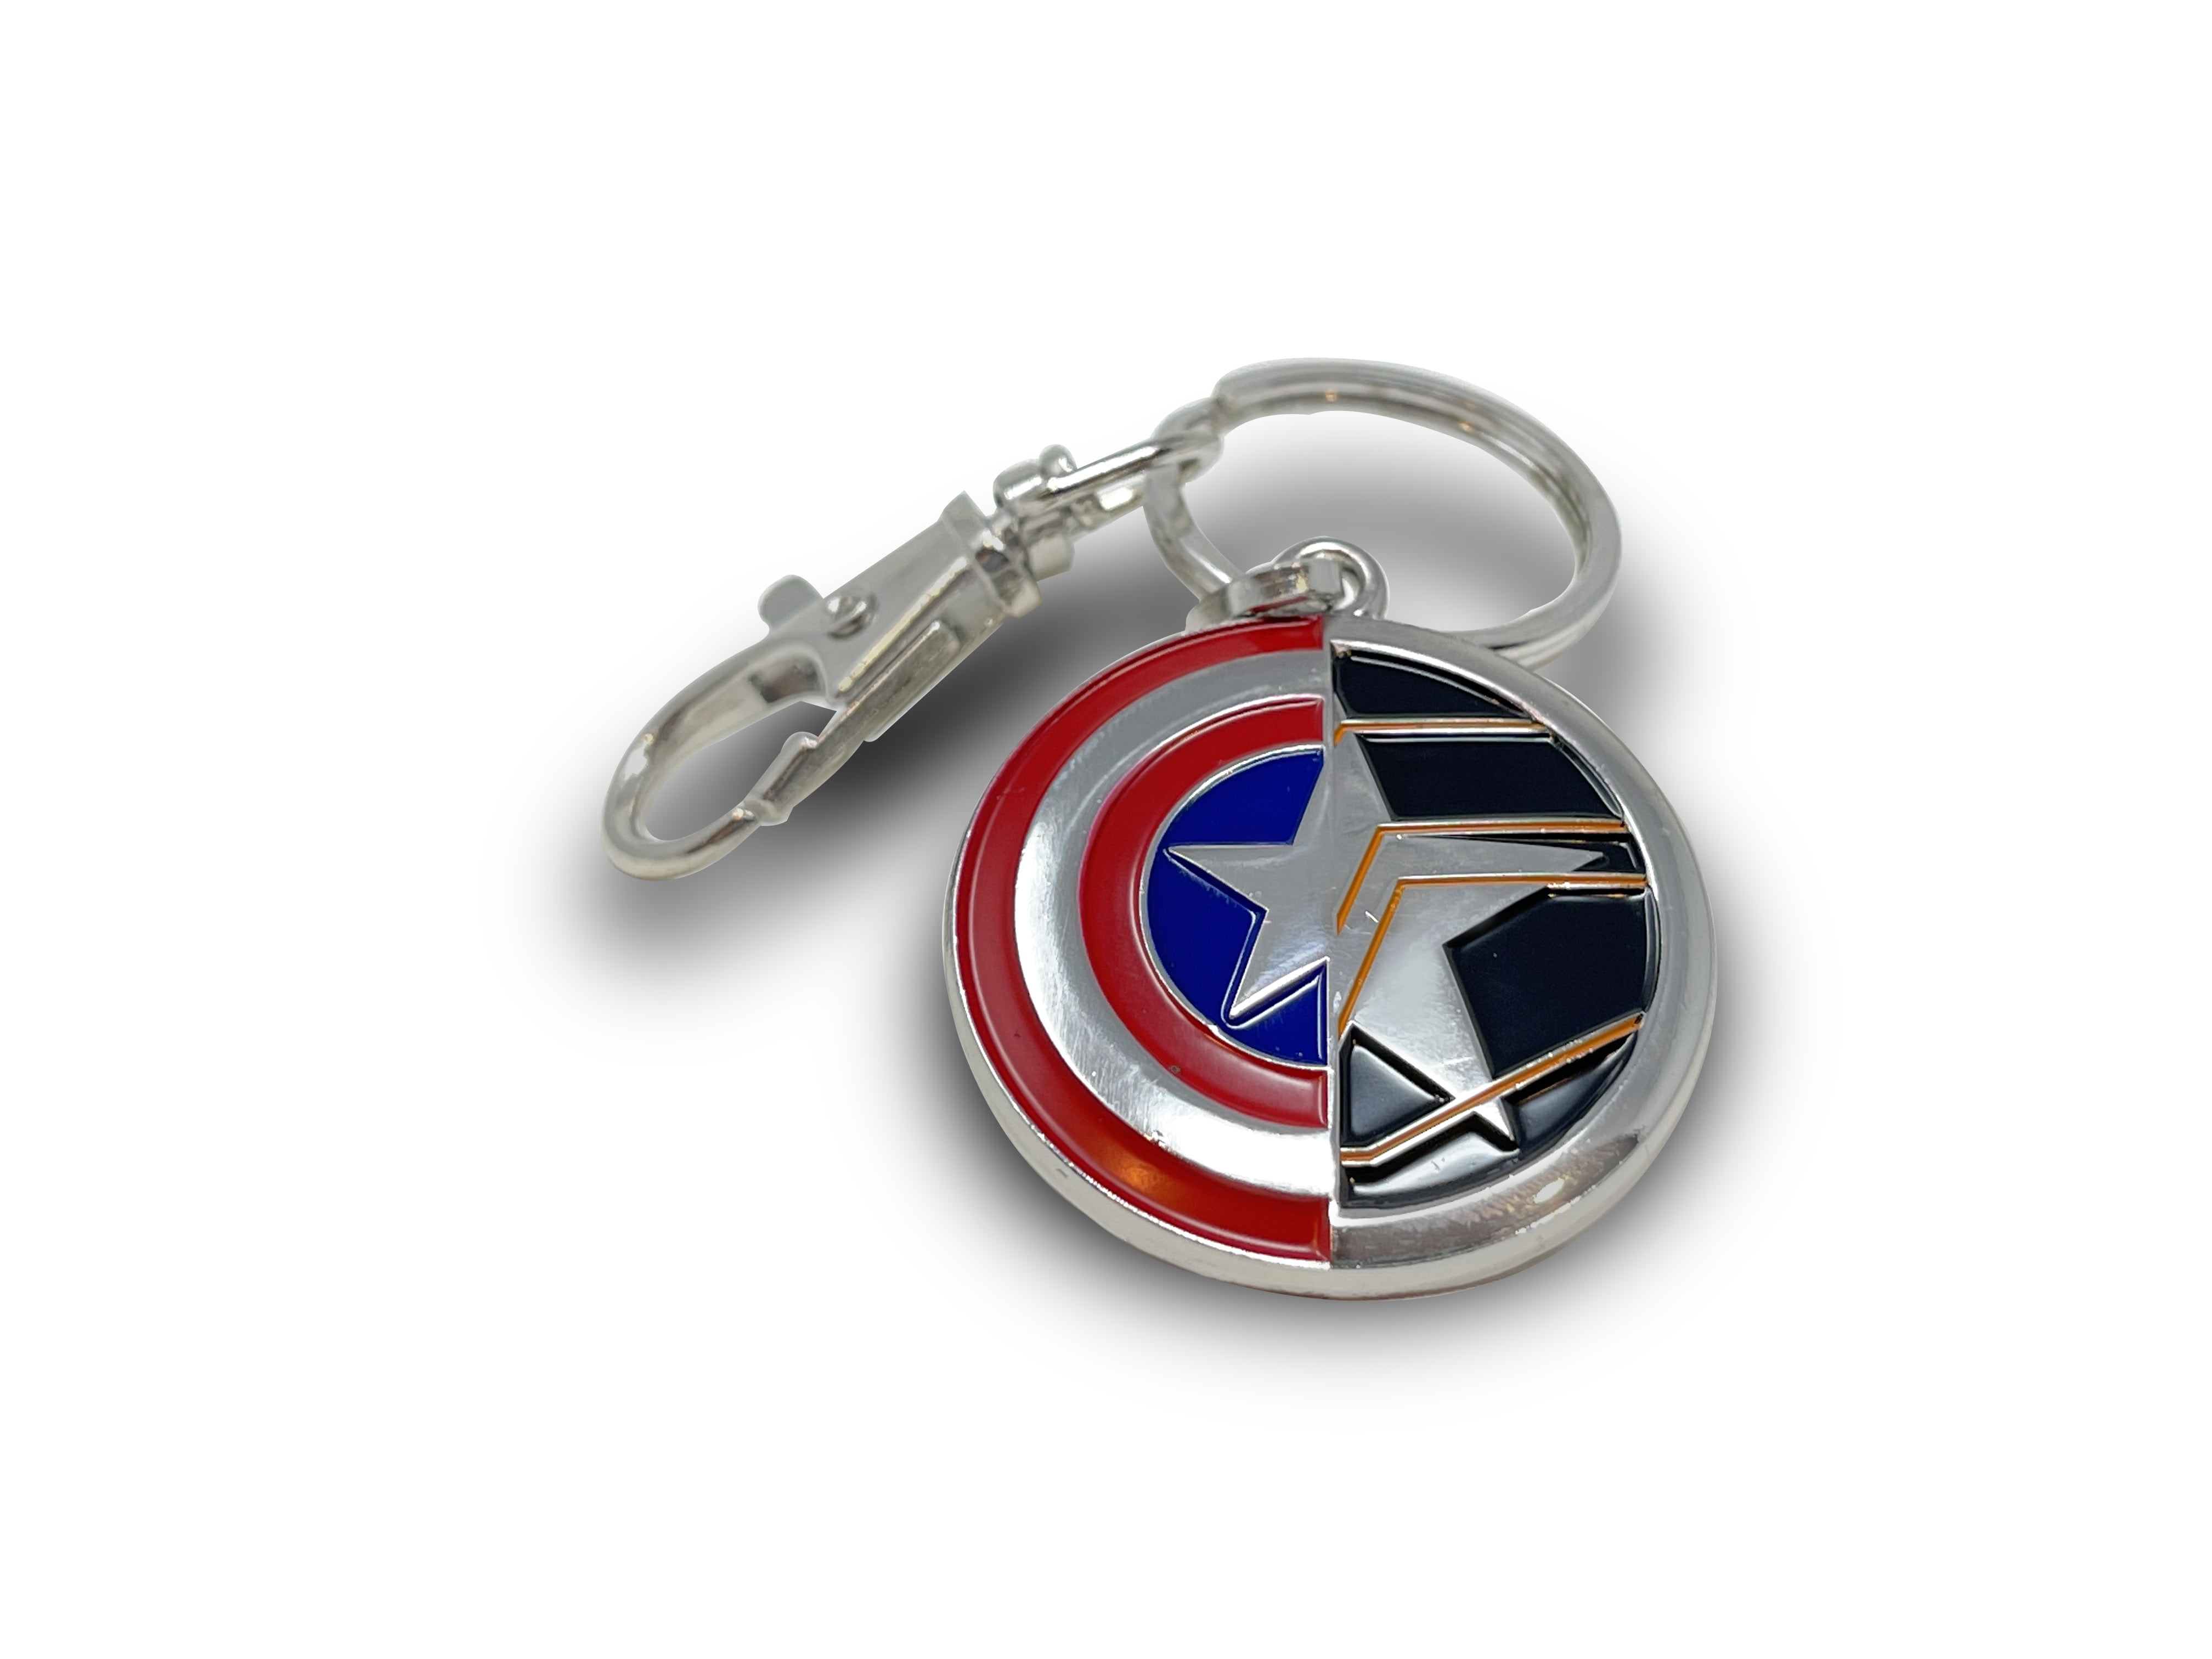 The Falcon and the Winter Soldier Shield Key Chain Keychain 2021 